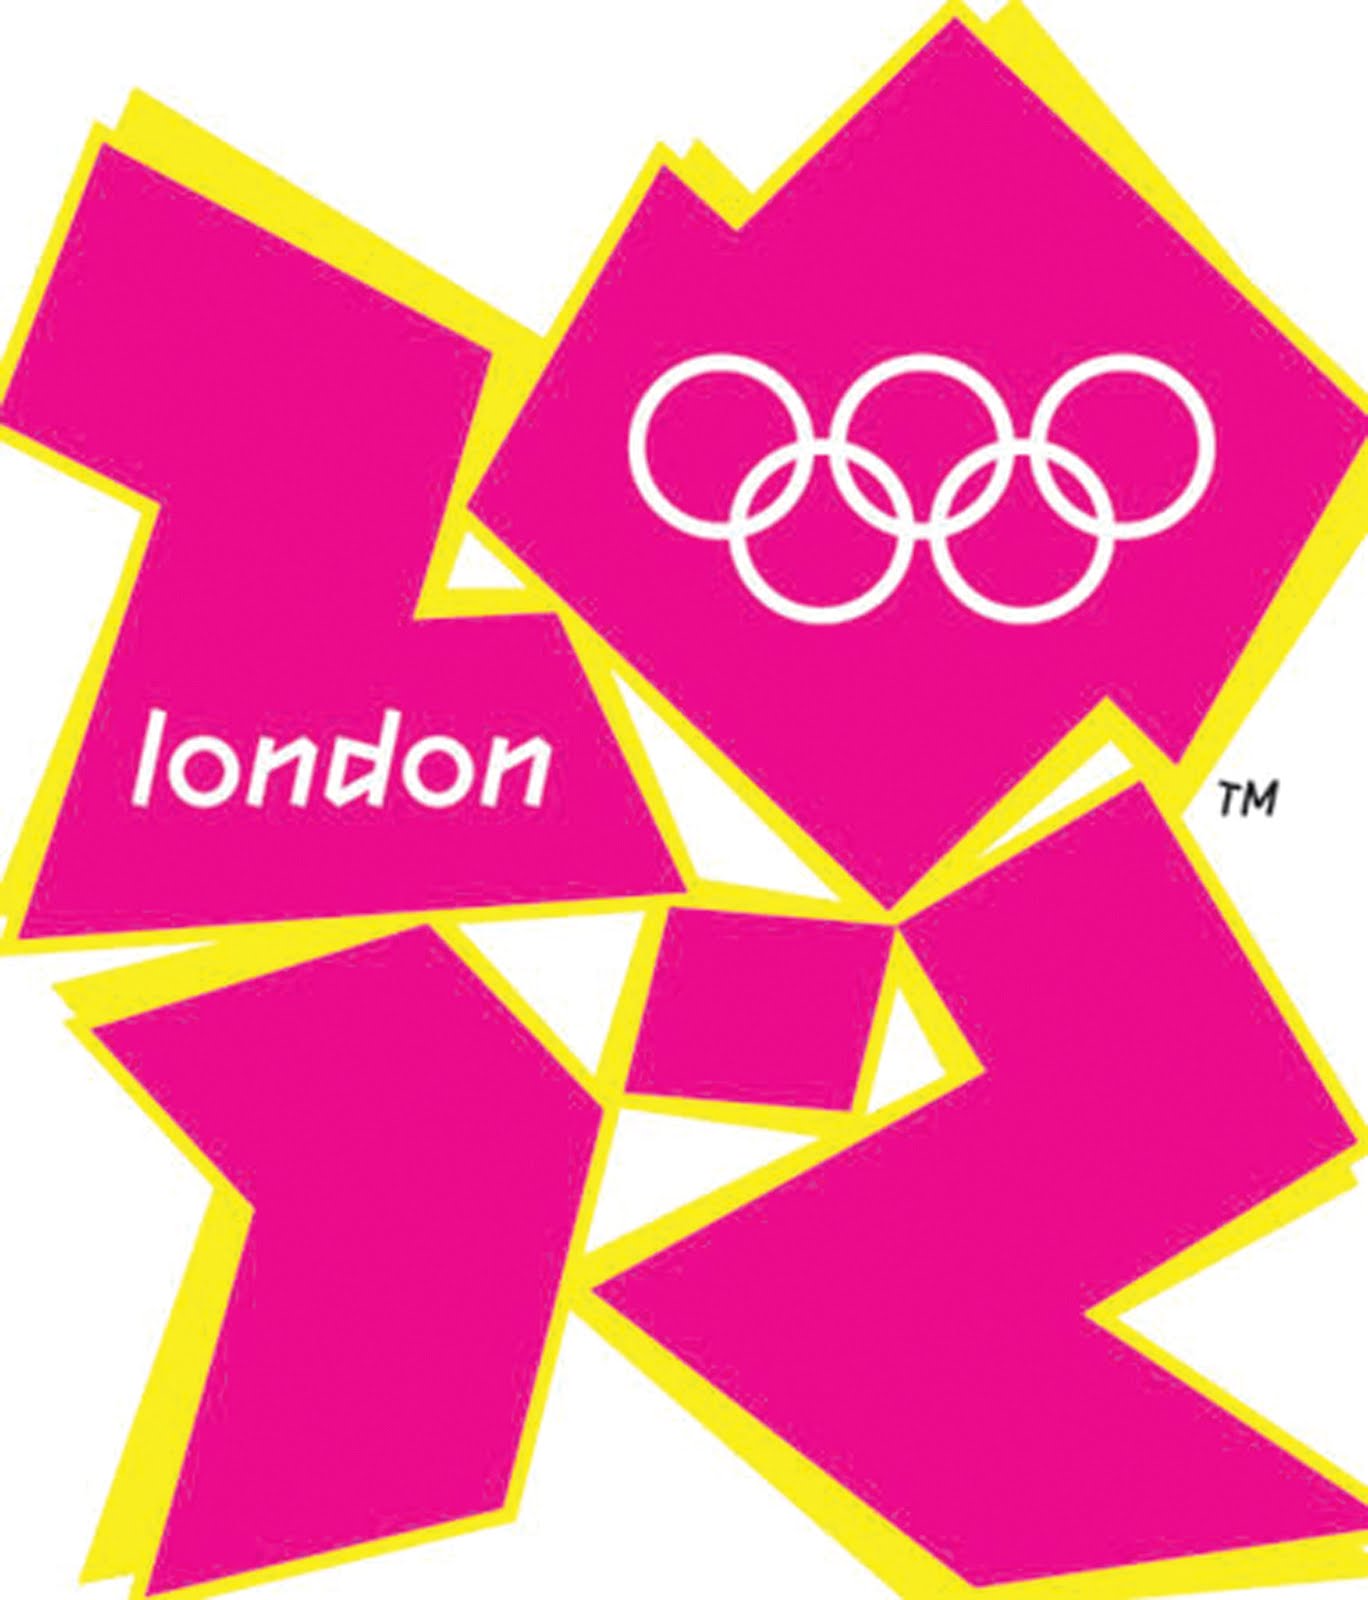 We honestly can't get enough of this Olympic logo controversy